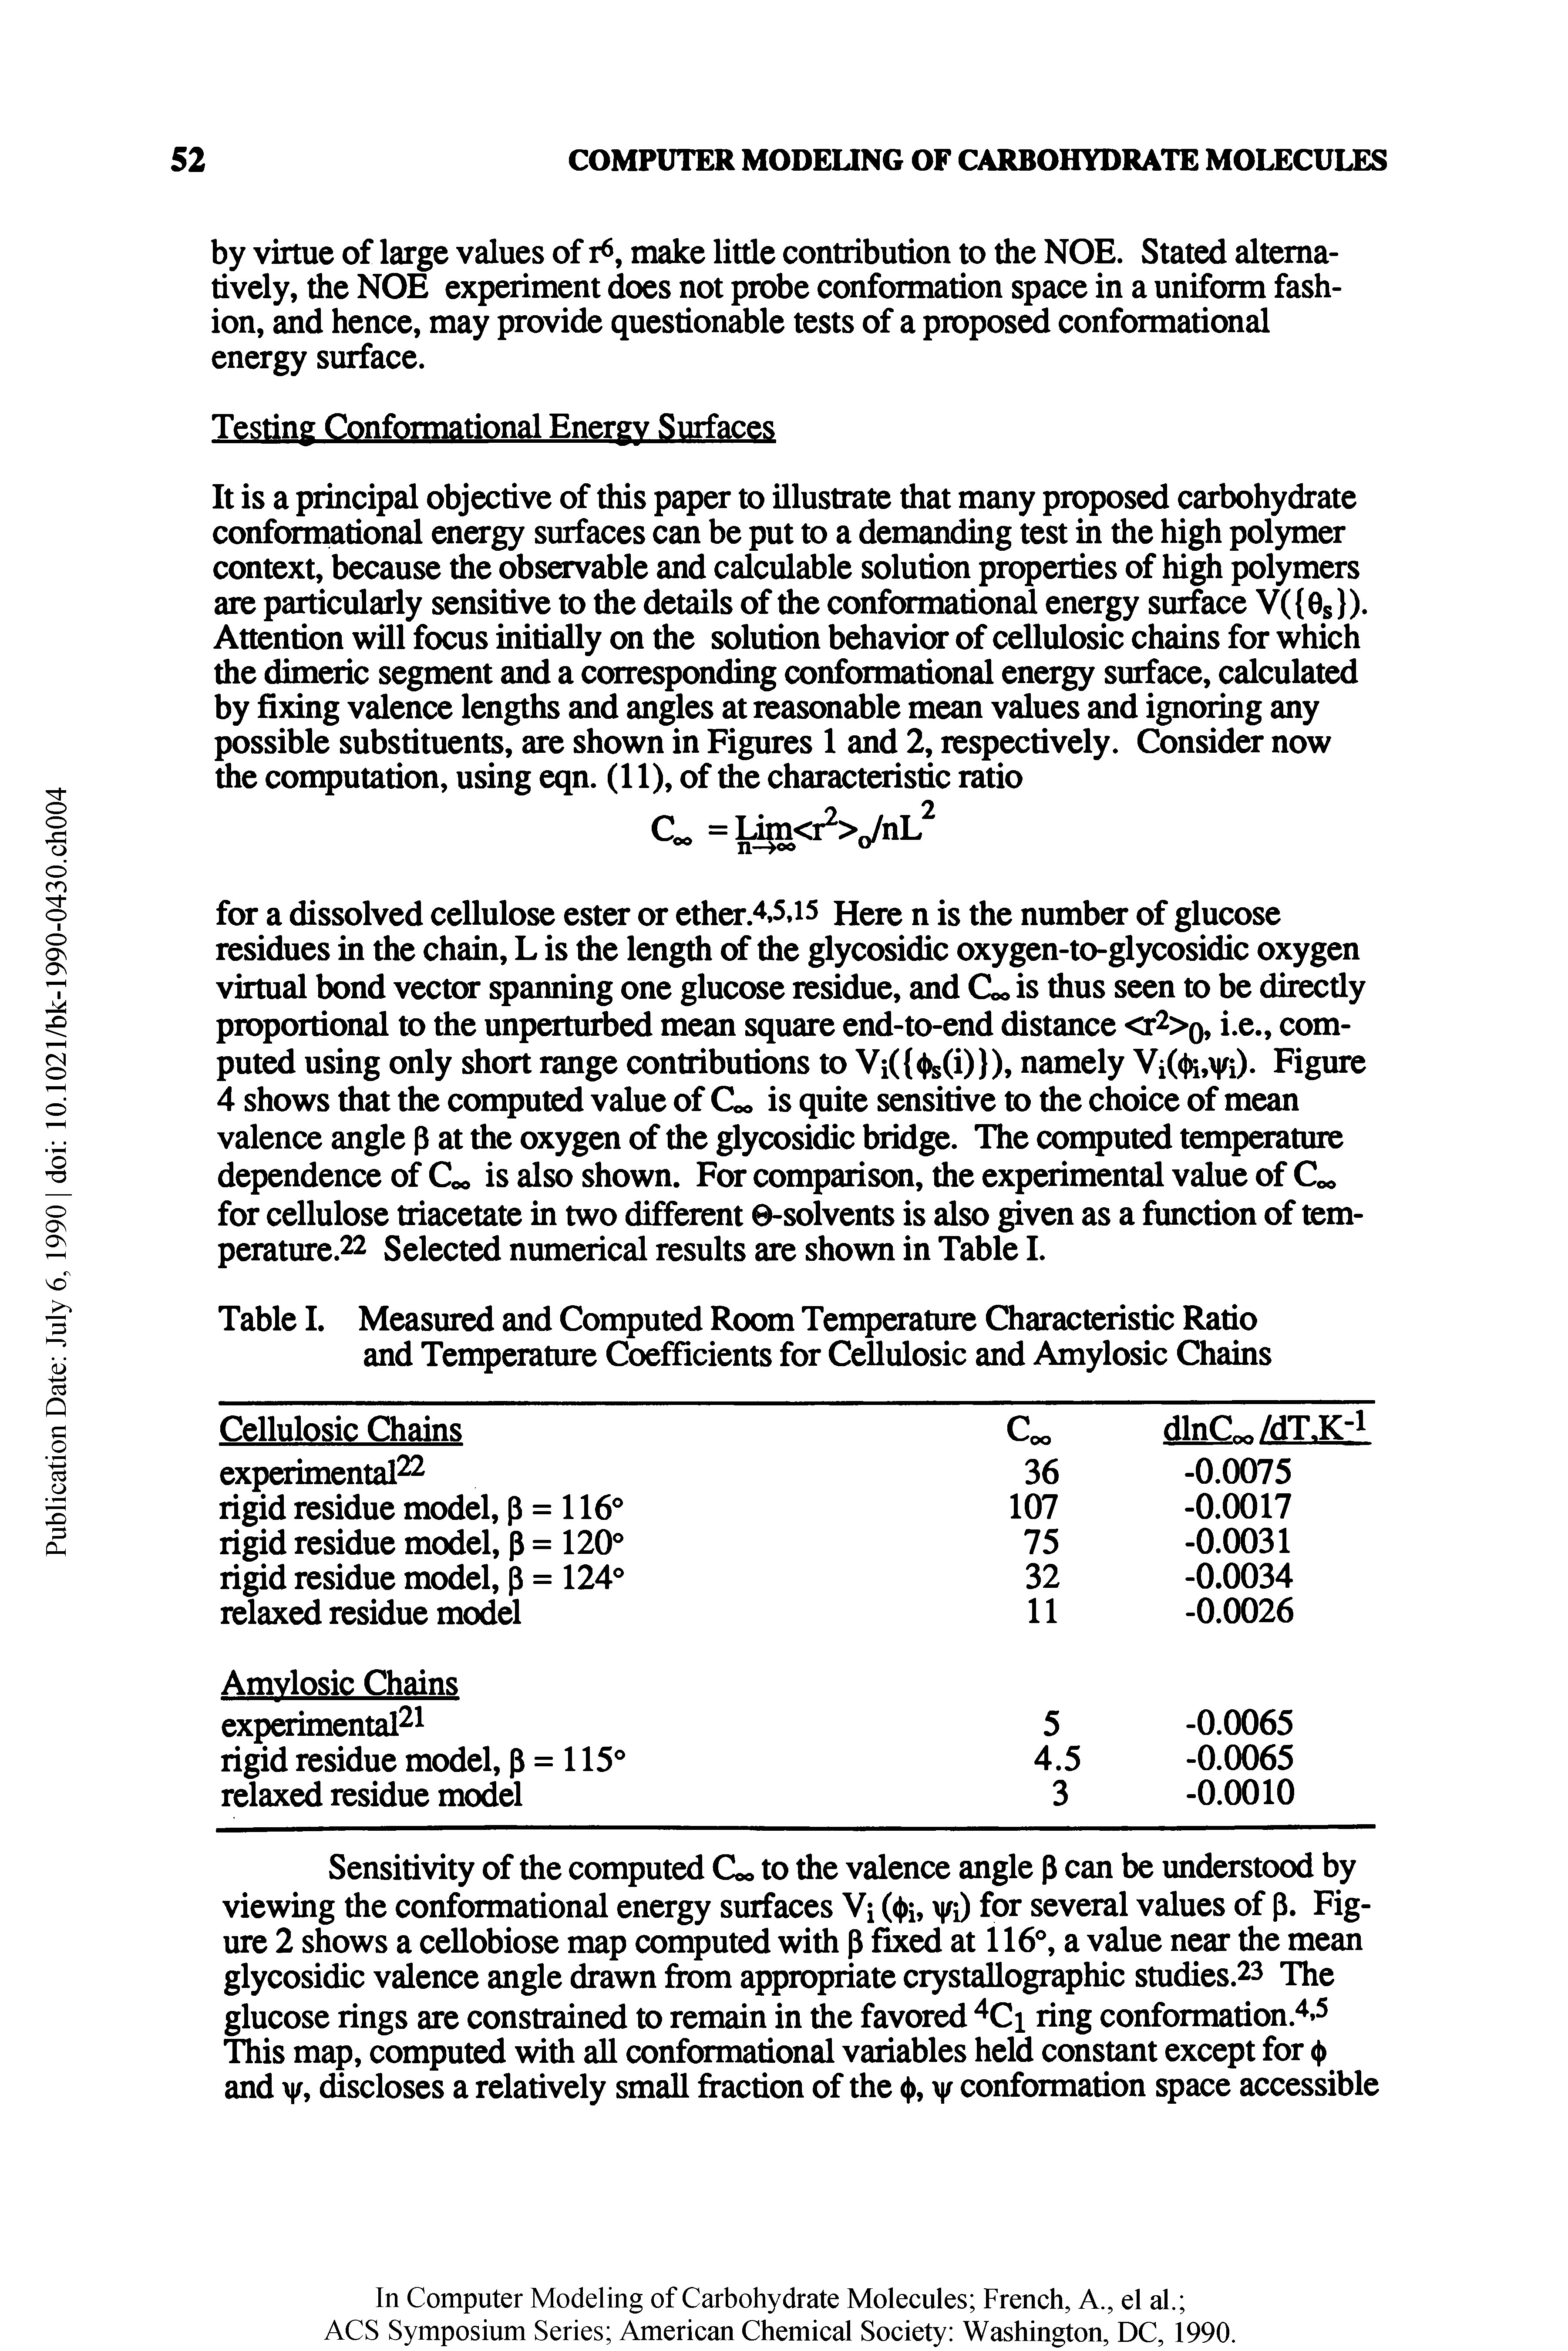 Table I. Measured and Computed Room Temperature Characteristic Ratio and Temperature Coefficients for Cellulosic and Amylosic Chains...